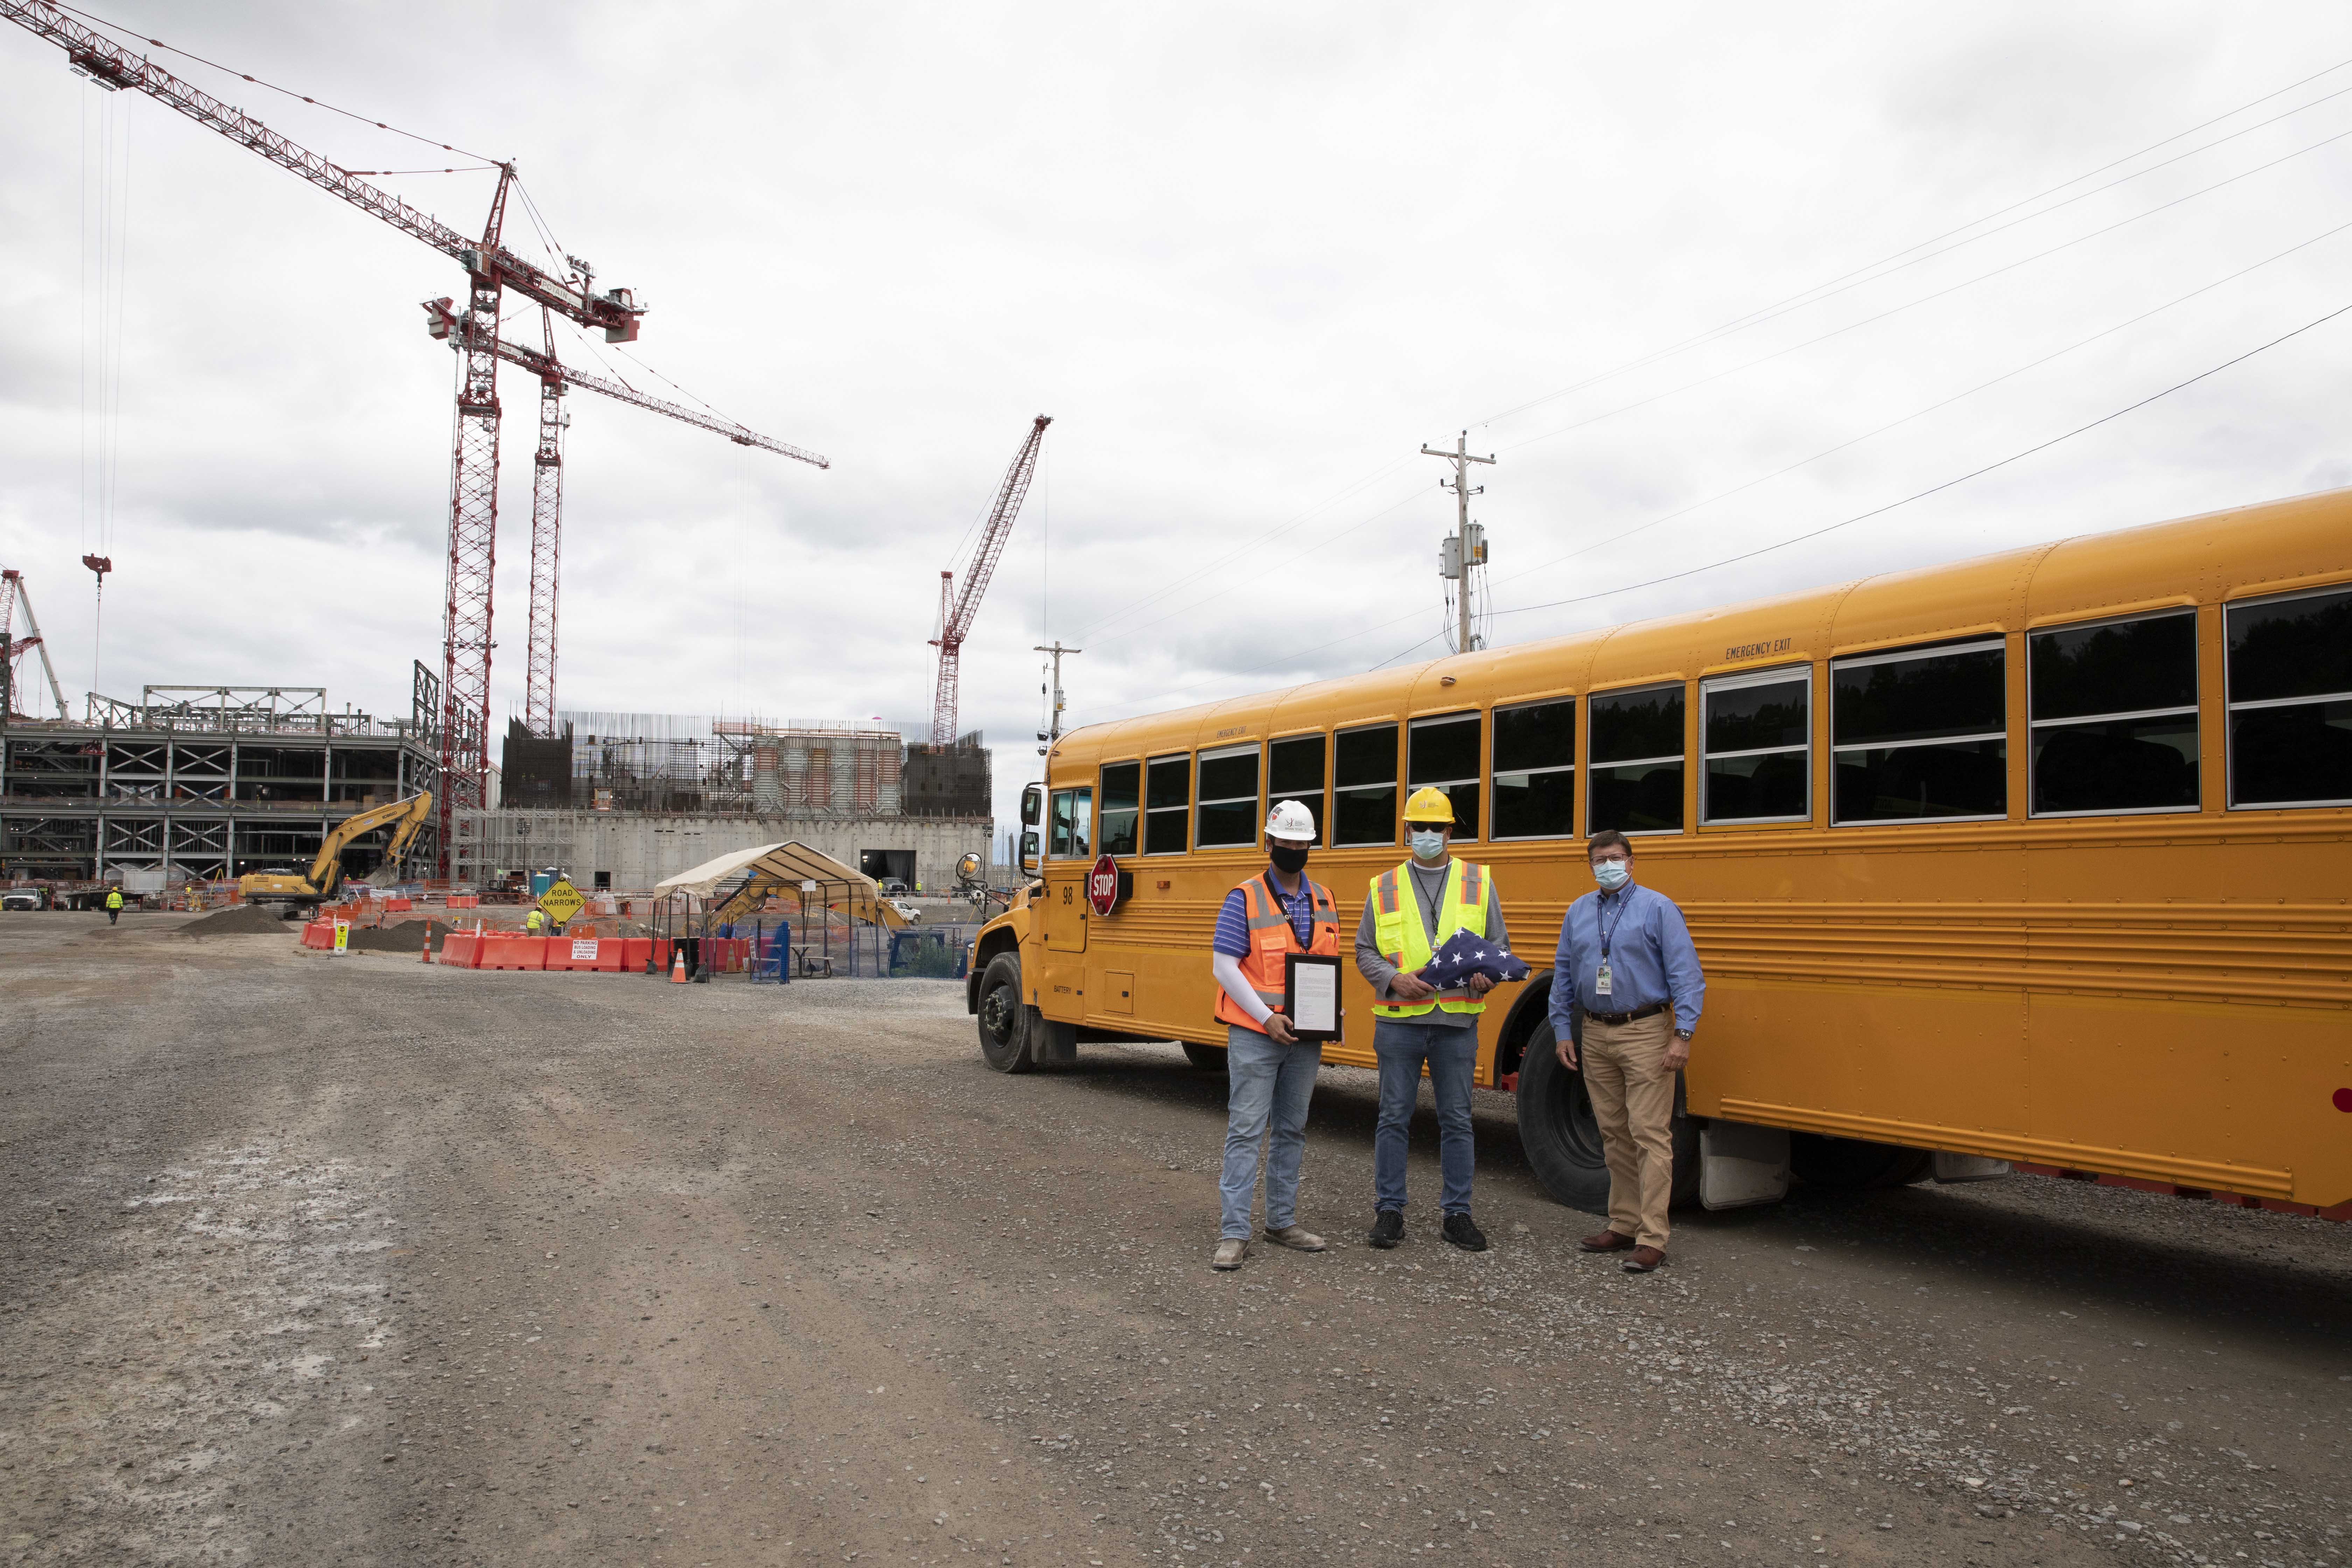 The UPF Project recognizes Lynch Bus Lines, a local school bus contractor, for their assistance during COVID-19 operations